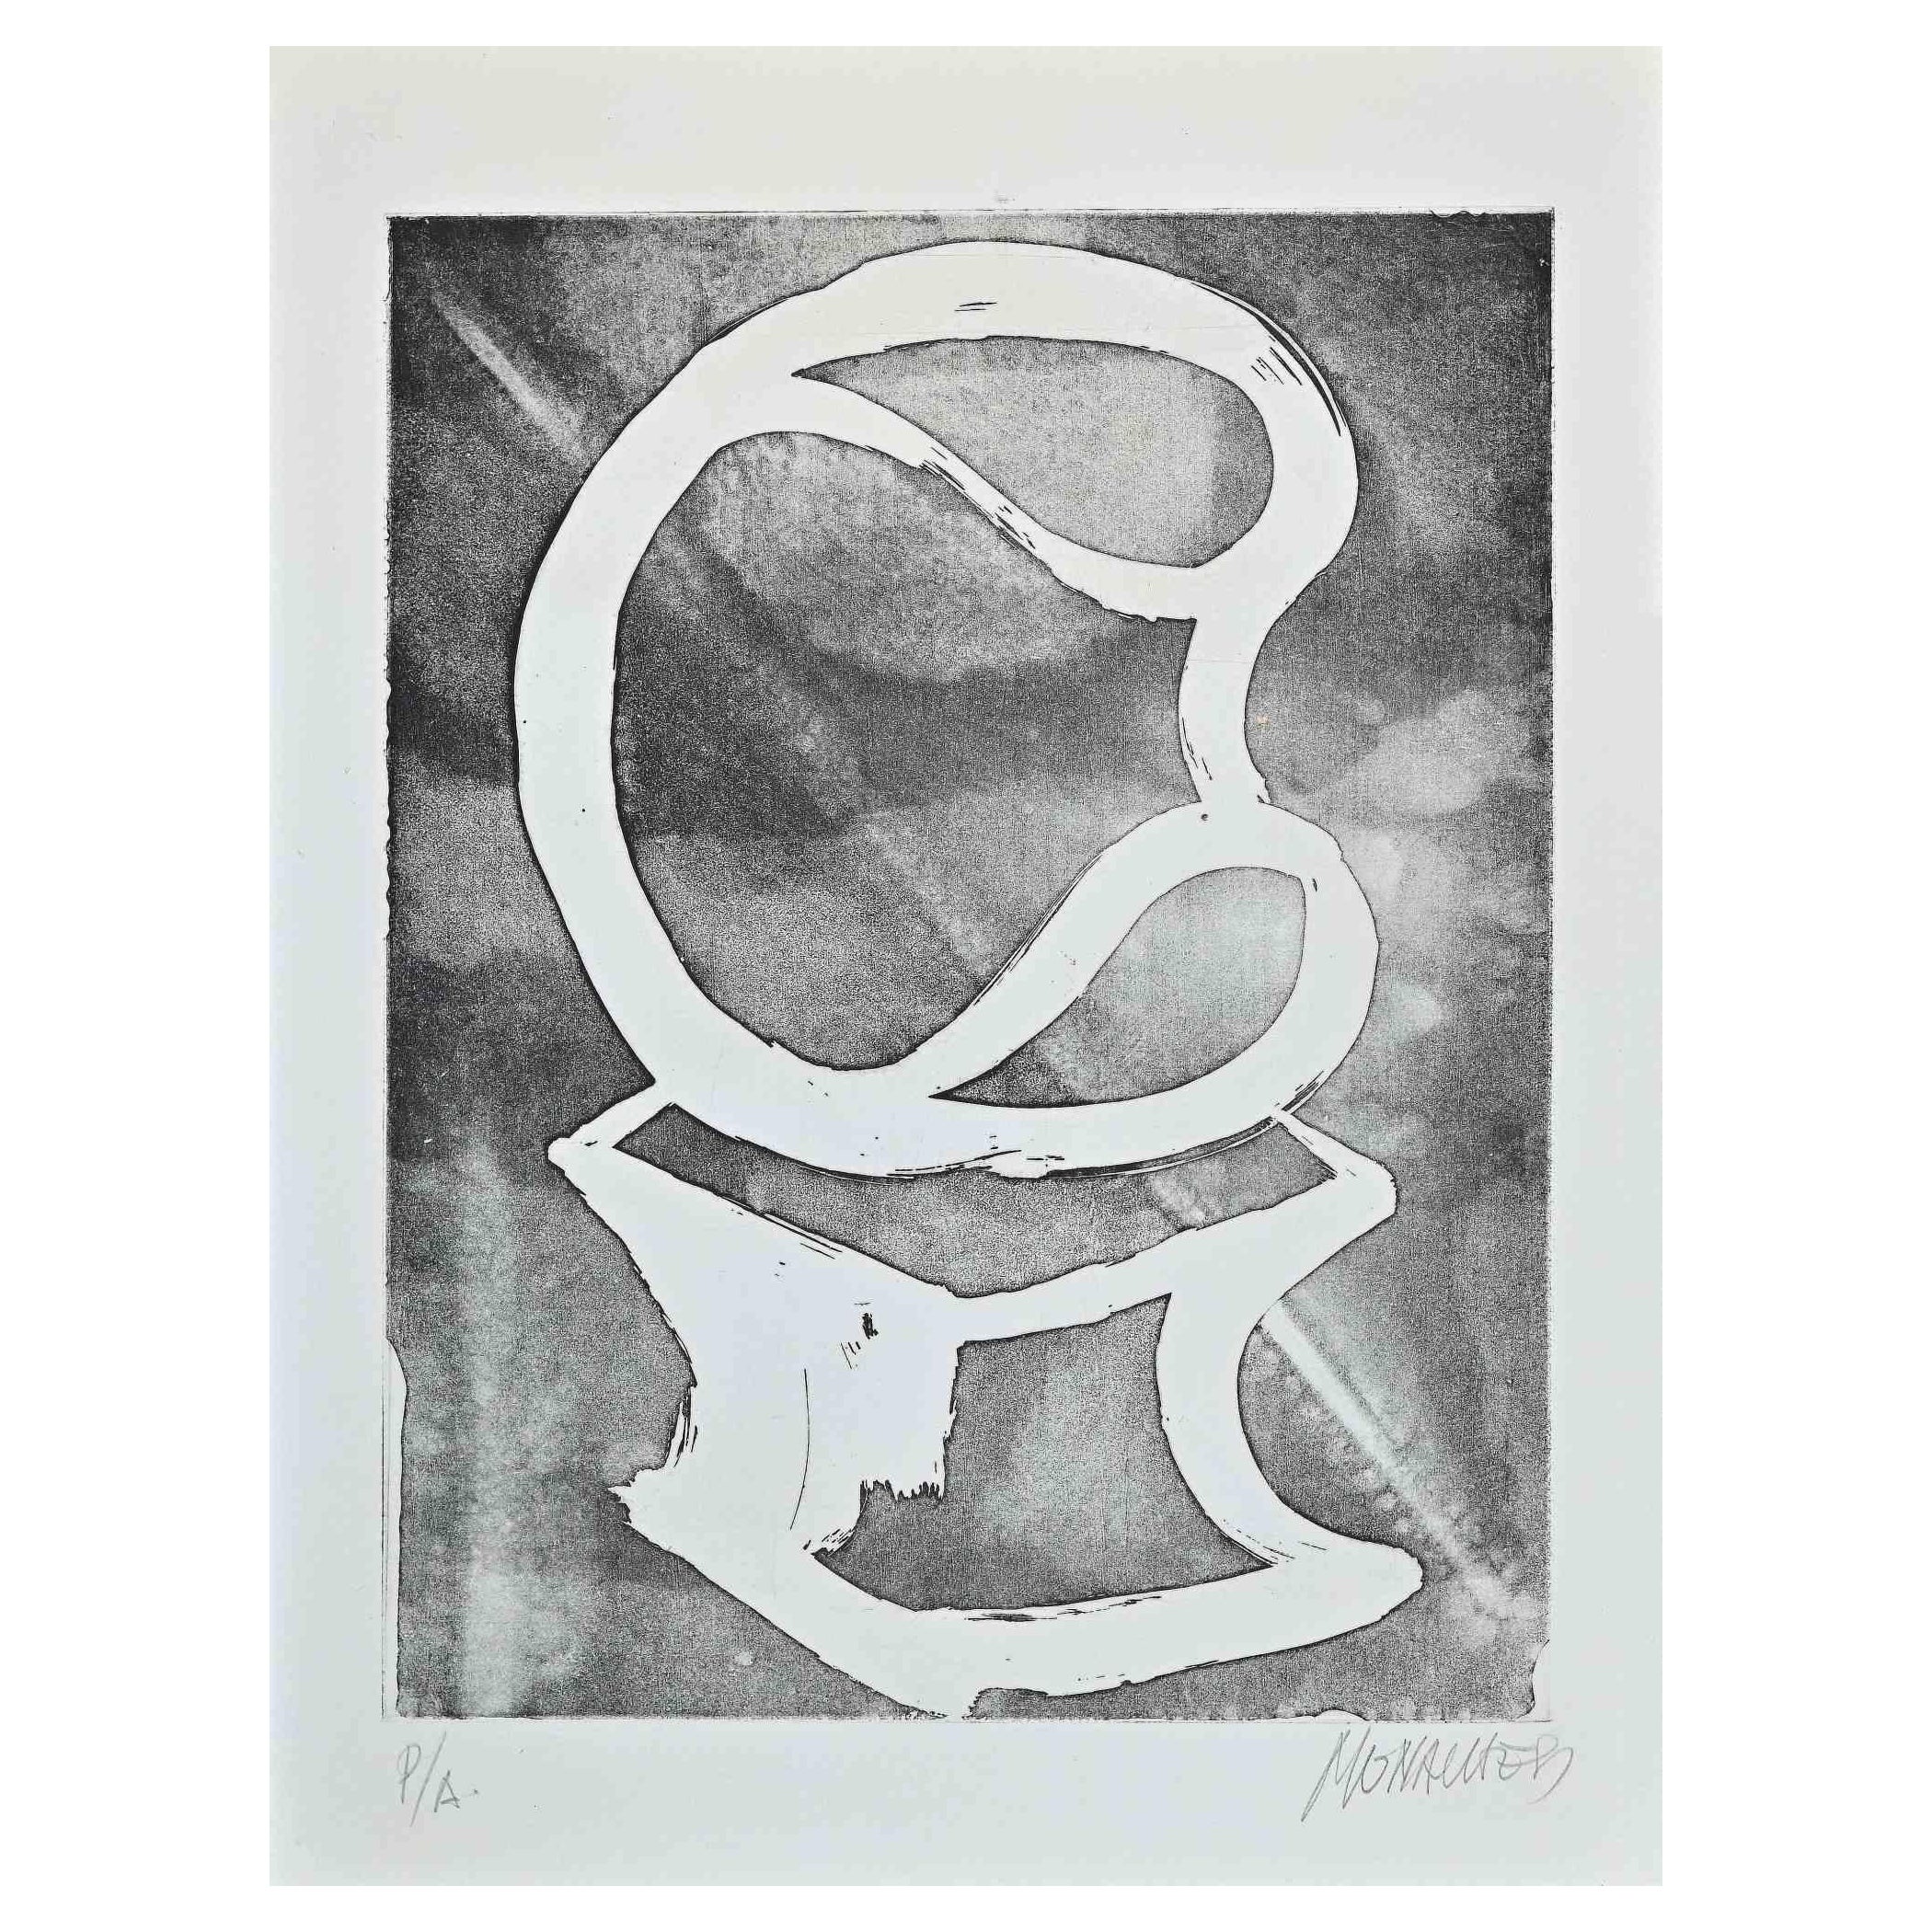 Sculpture is an original etching artwork on paper realized by Sante Monachesi.

Hand-signed on the lower right by pencil.Artist proof.

it is an artist's proofs edition on the lower left.

Very good conditions.

The artwork is created in perfect